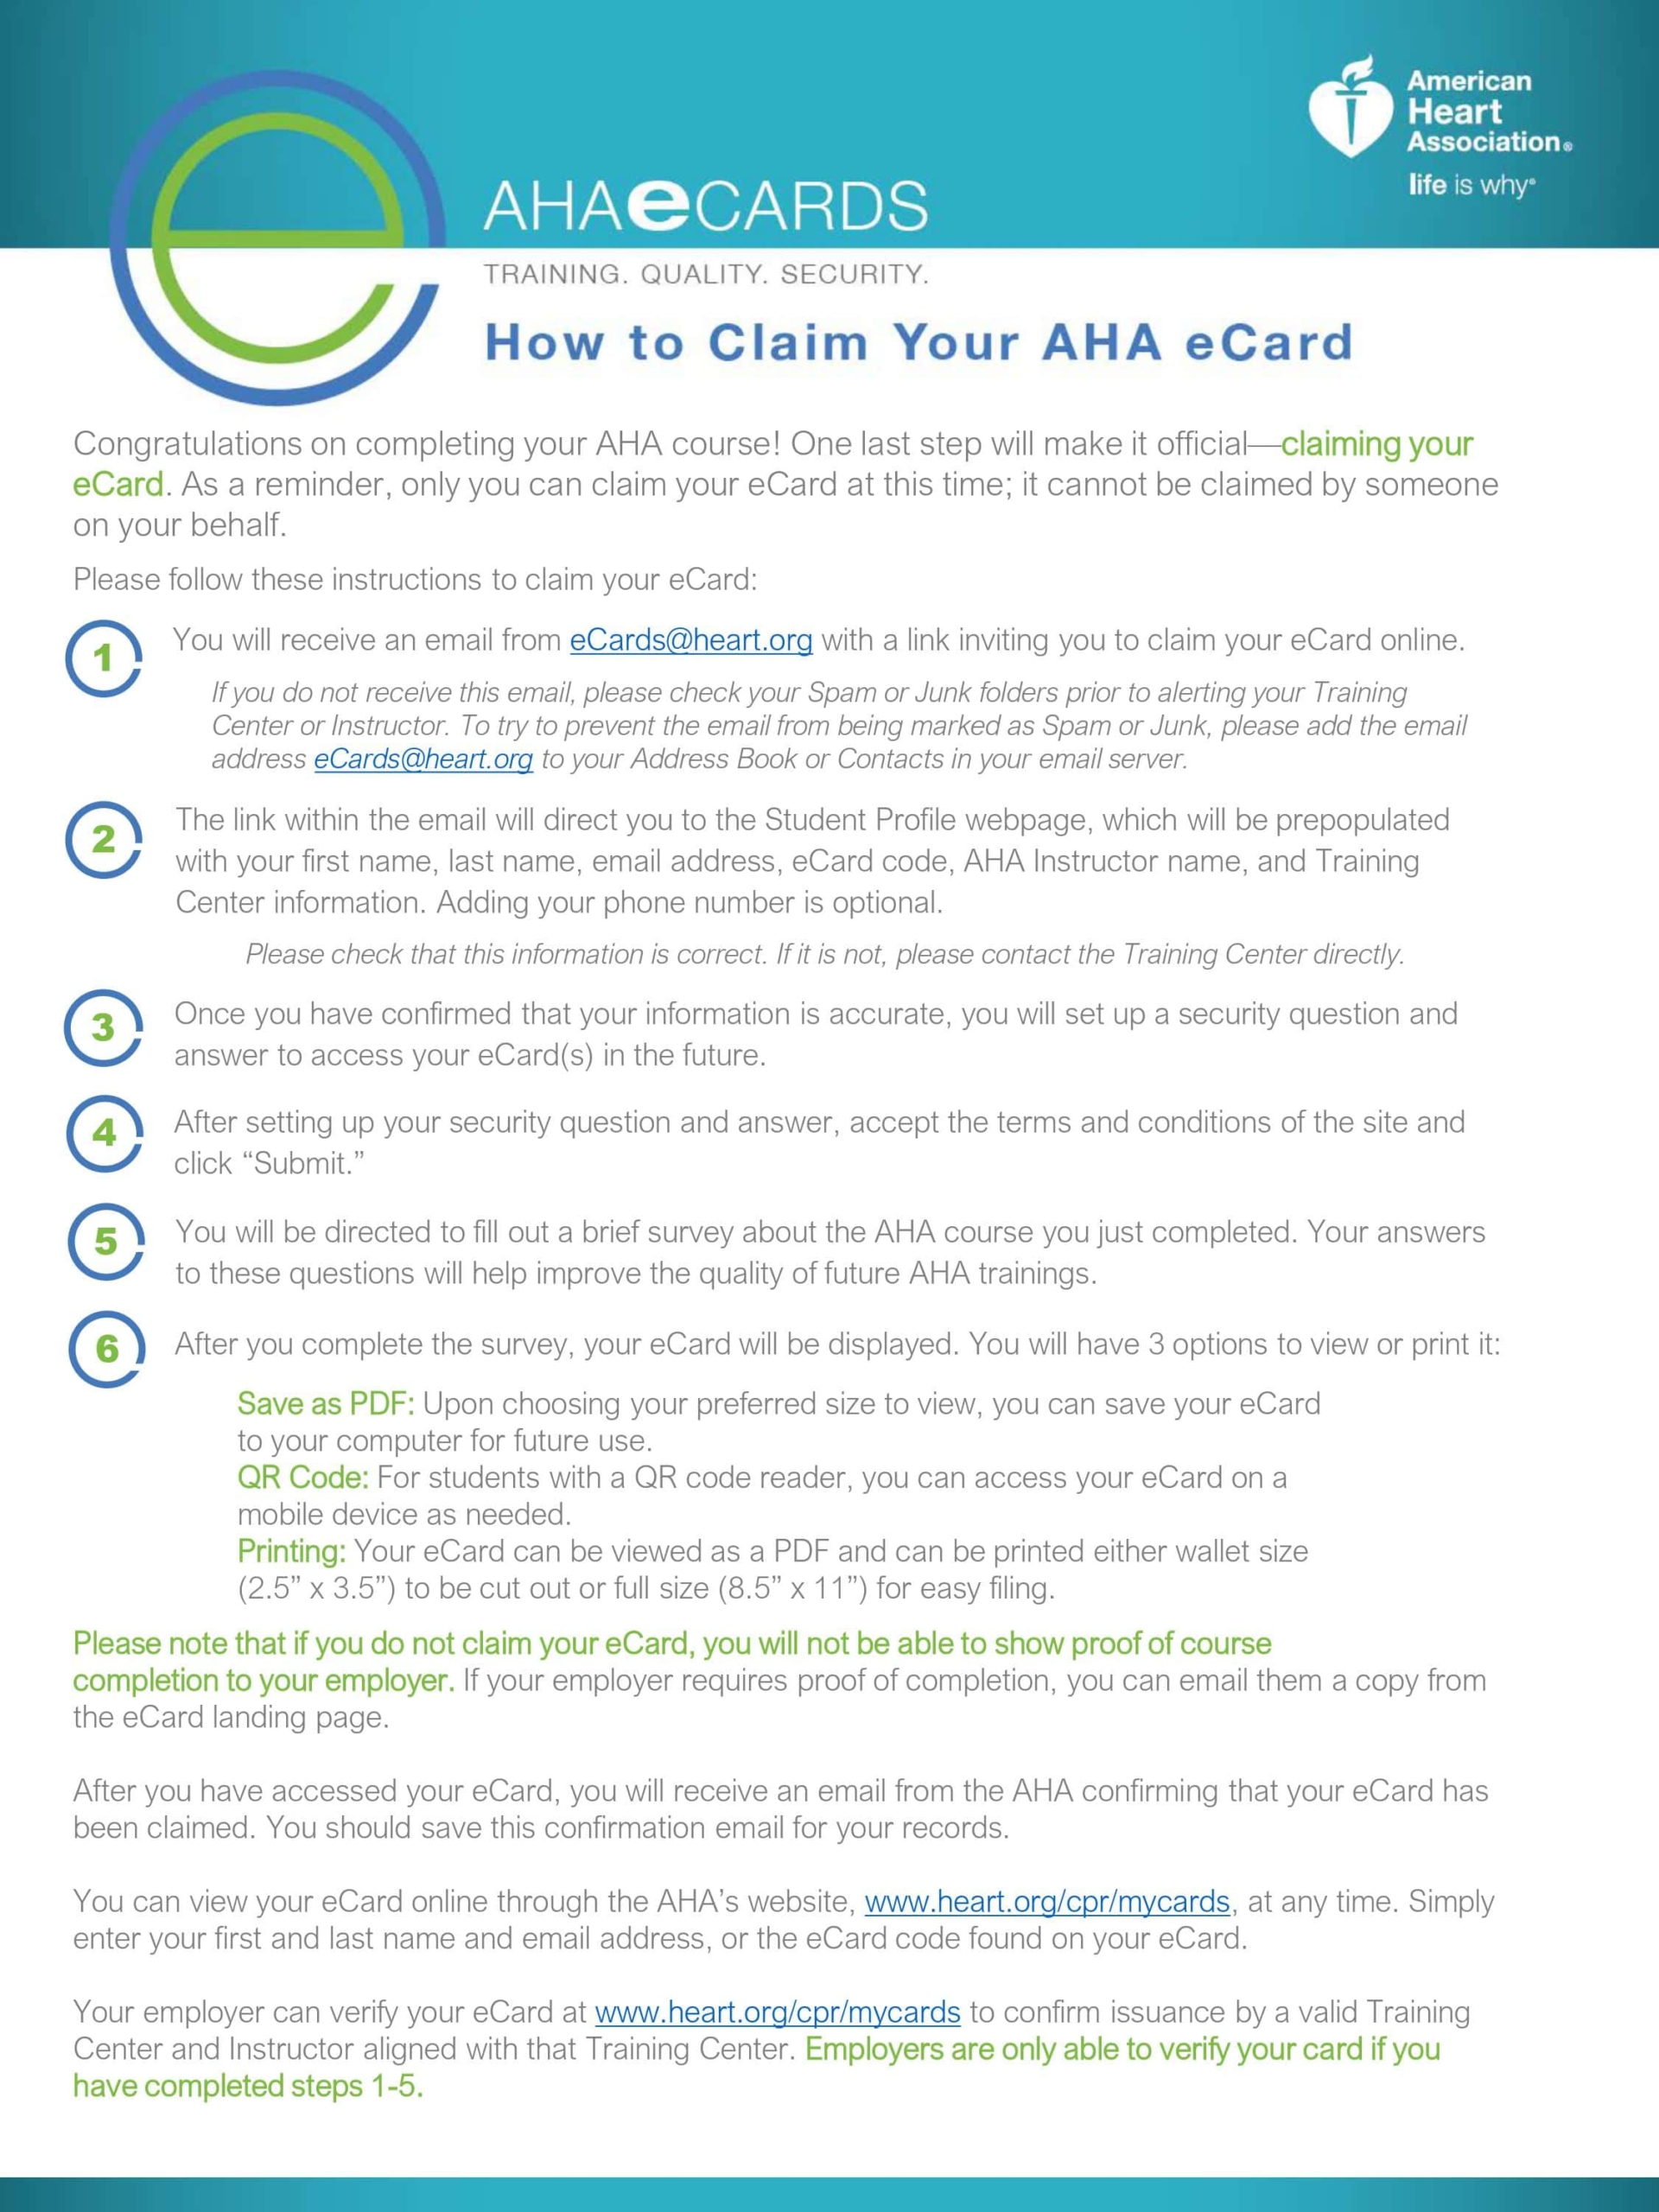 How To Claim Your eCard